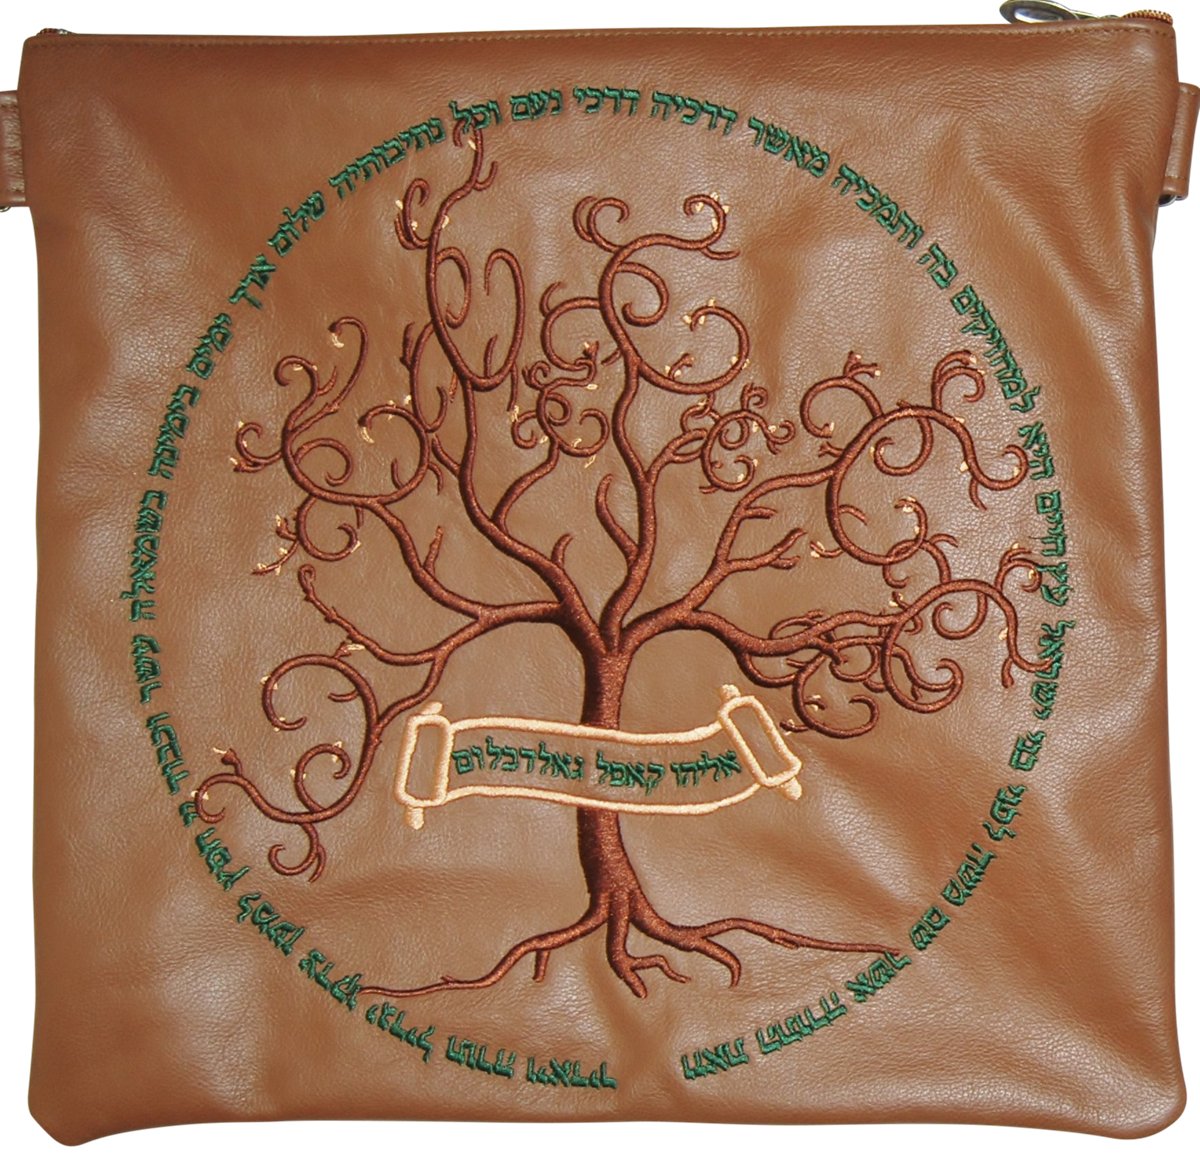 Artistic tree design on tan leather - Simcha Couture